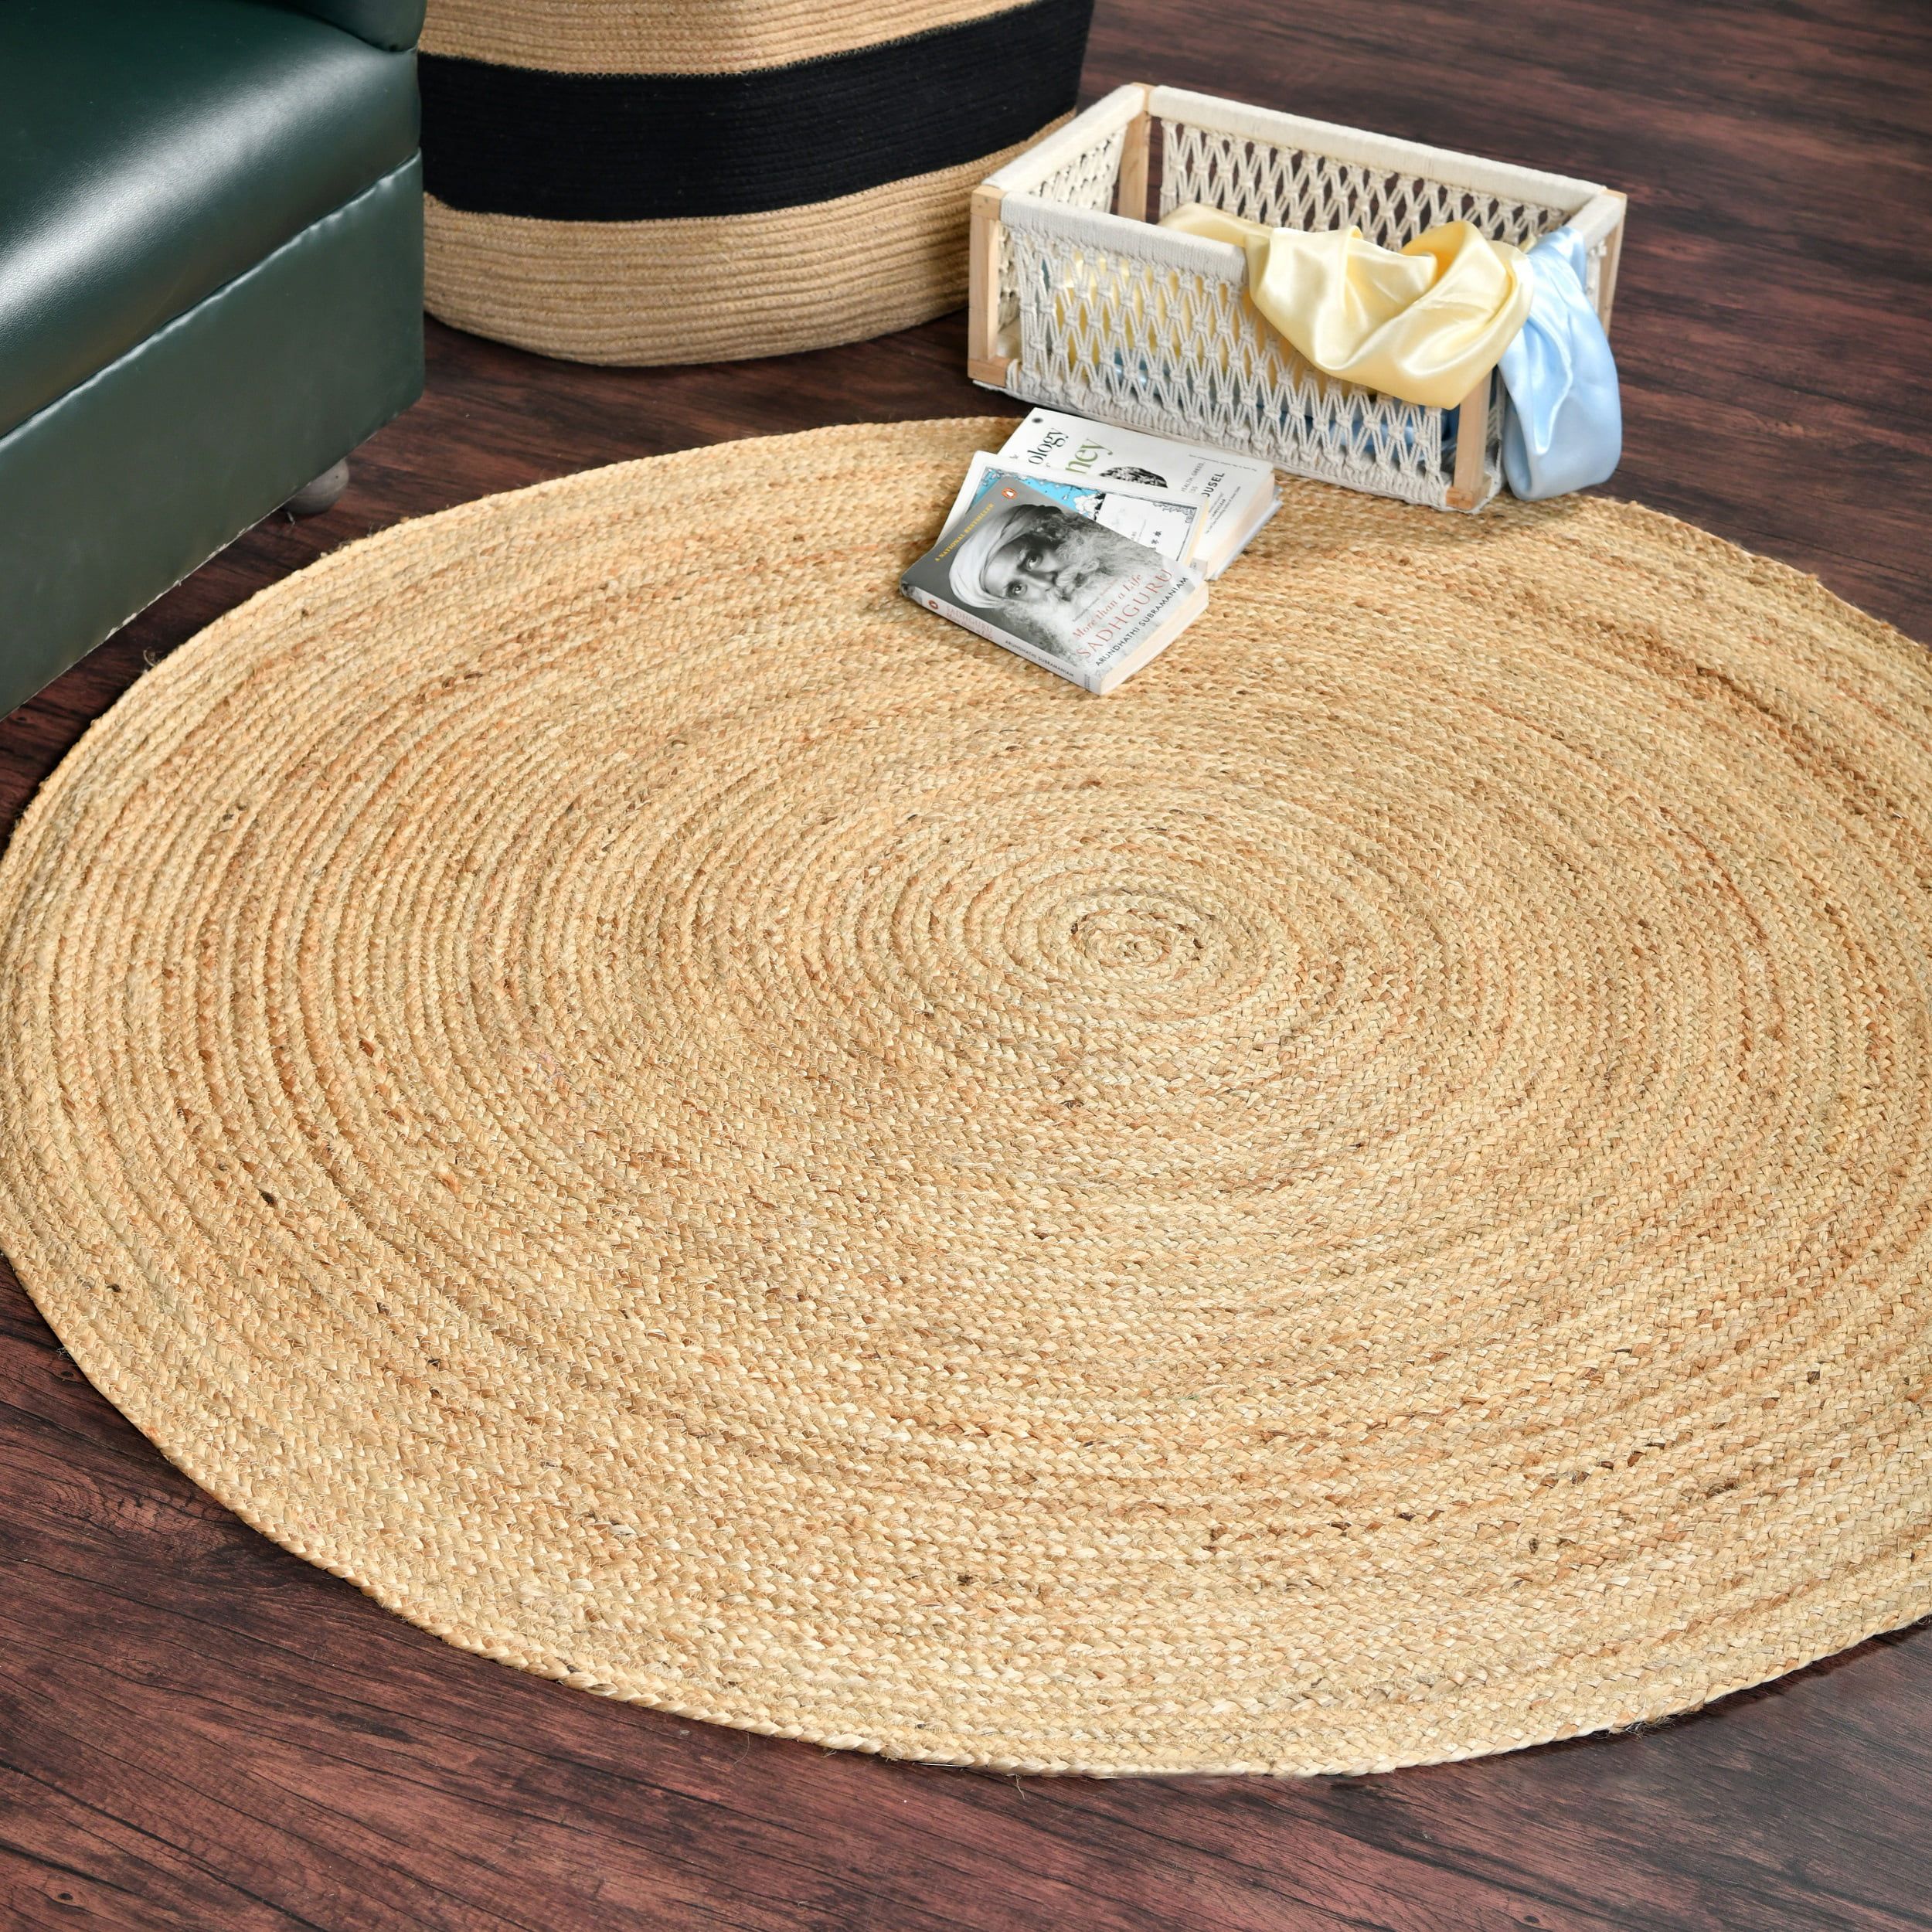 Homemonde Hand Woven Braided Jute Area Rug 6 Ft Round Natural Reversible  Rugs For Kitchen Living Room Entryway – Walmart Inside Hand Woven Braided Rugs (Photo 2 of 15)